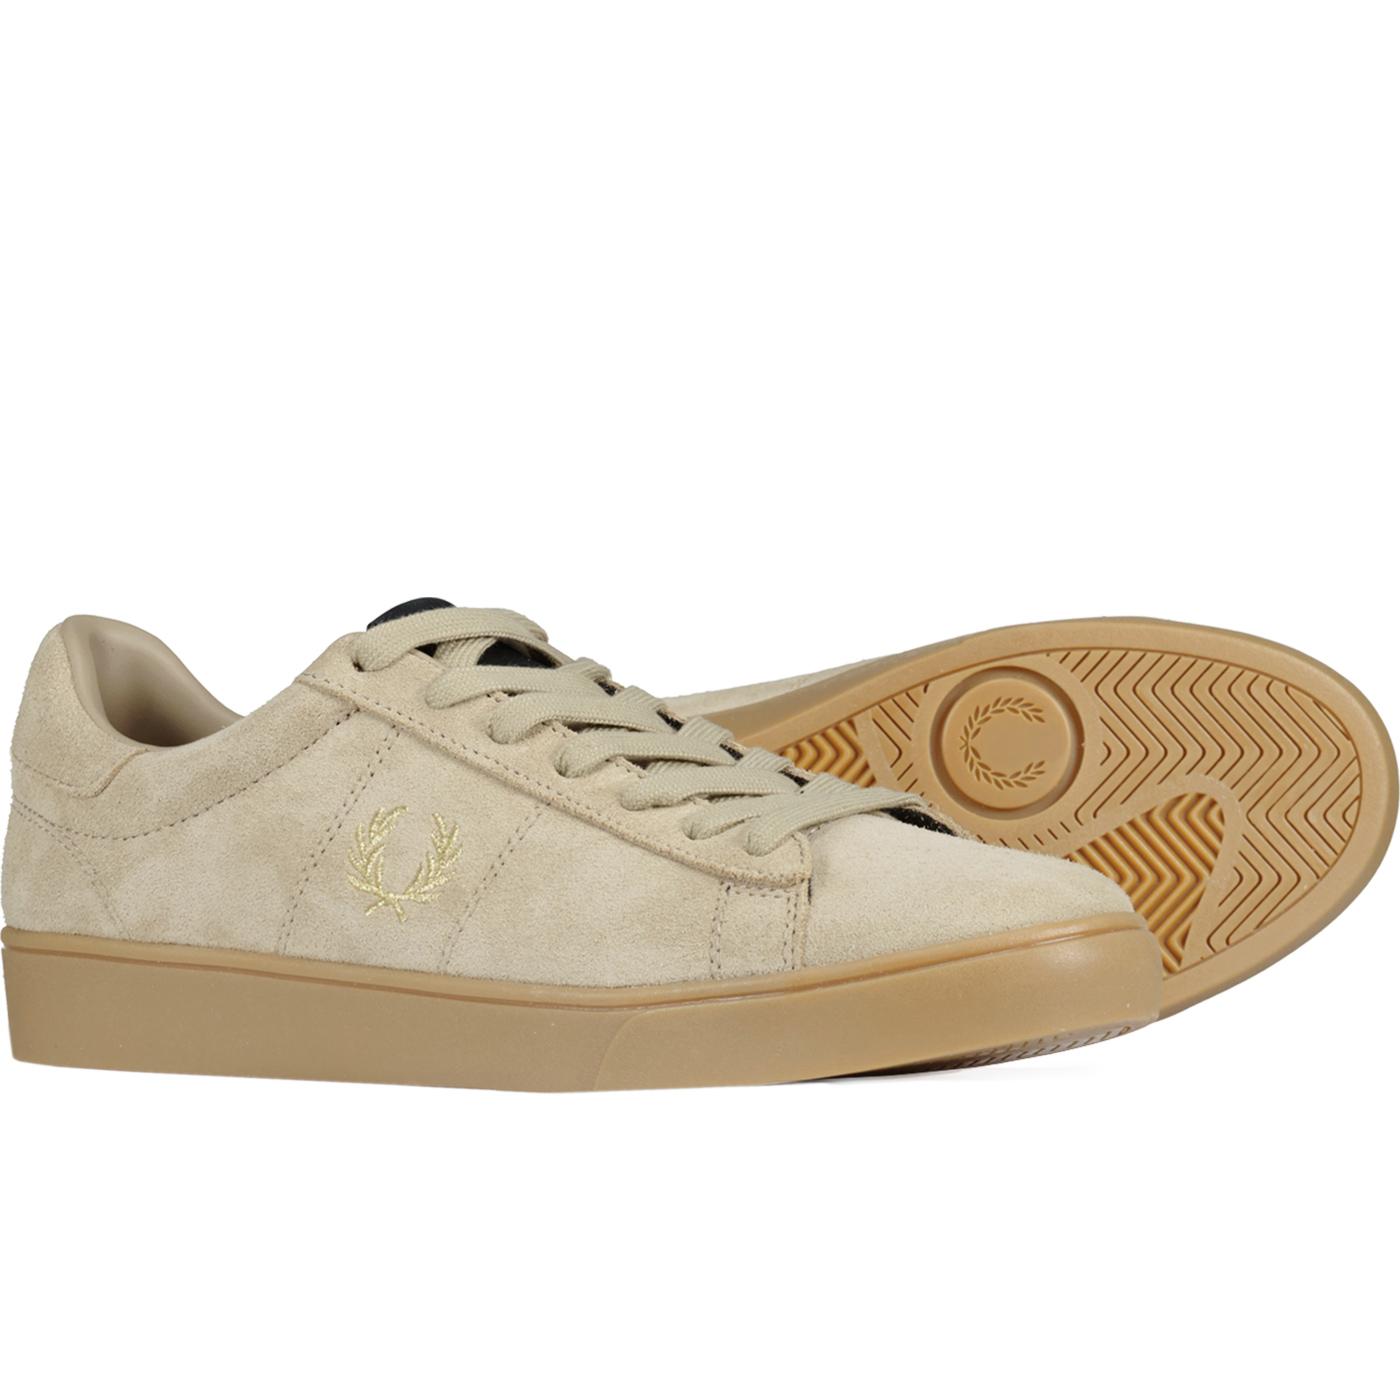 FRED PERRY Spencer Retro Suede Tennis Trainers in Stone